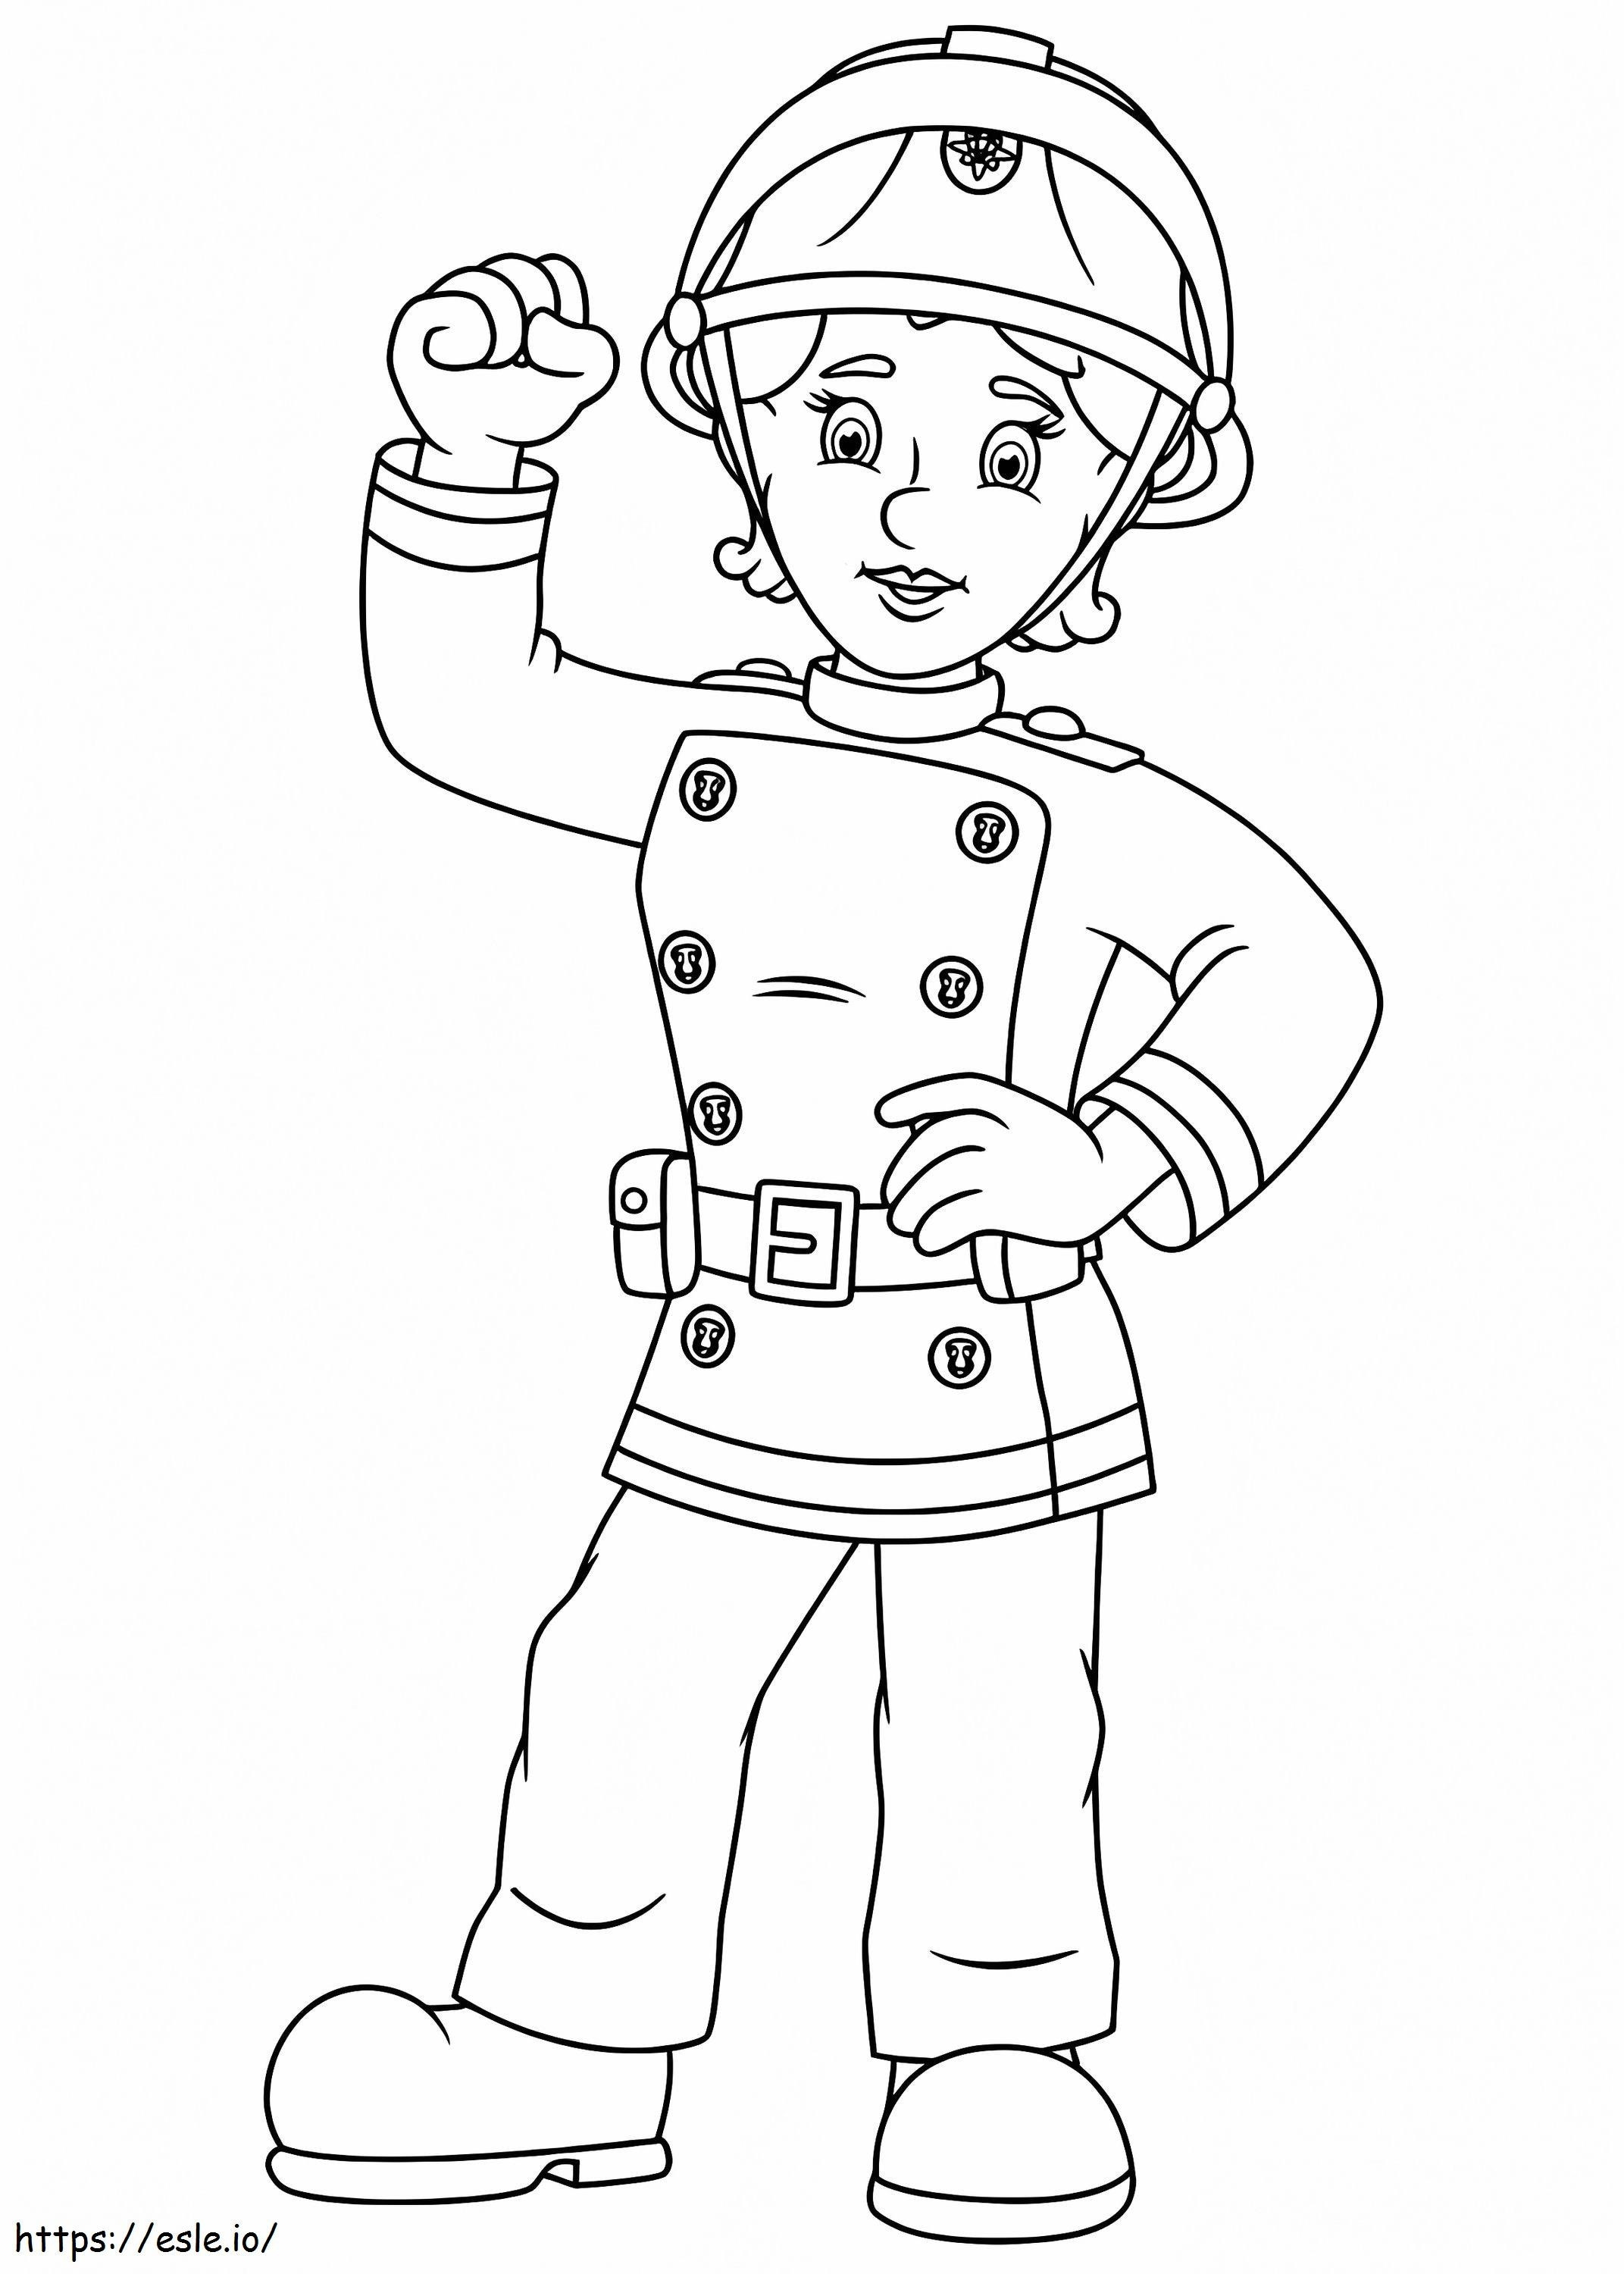 Fireman Sam Penny coloring page